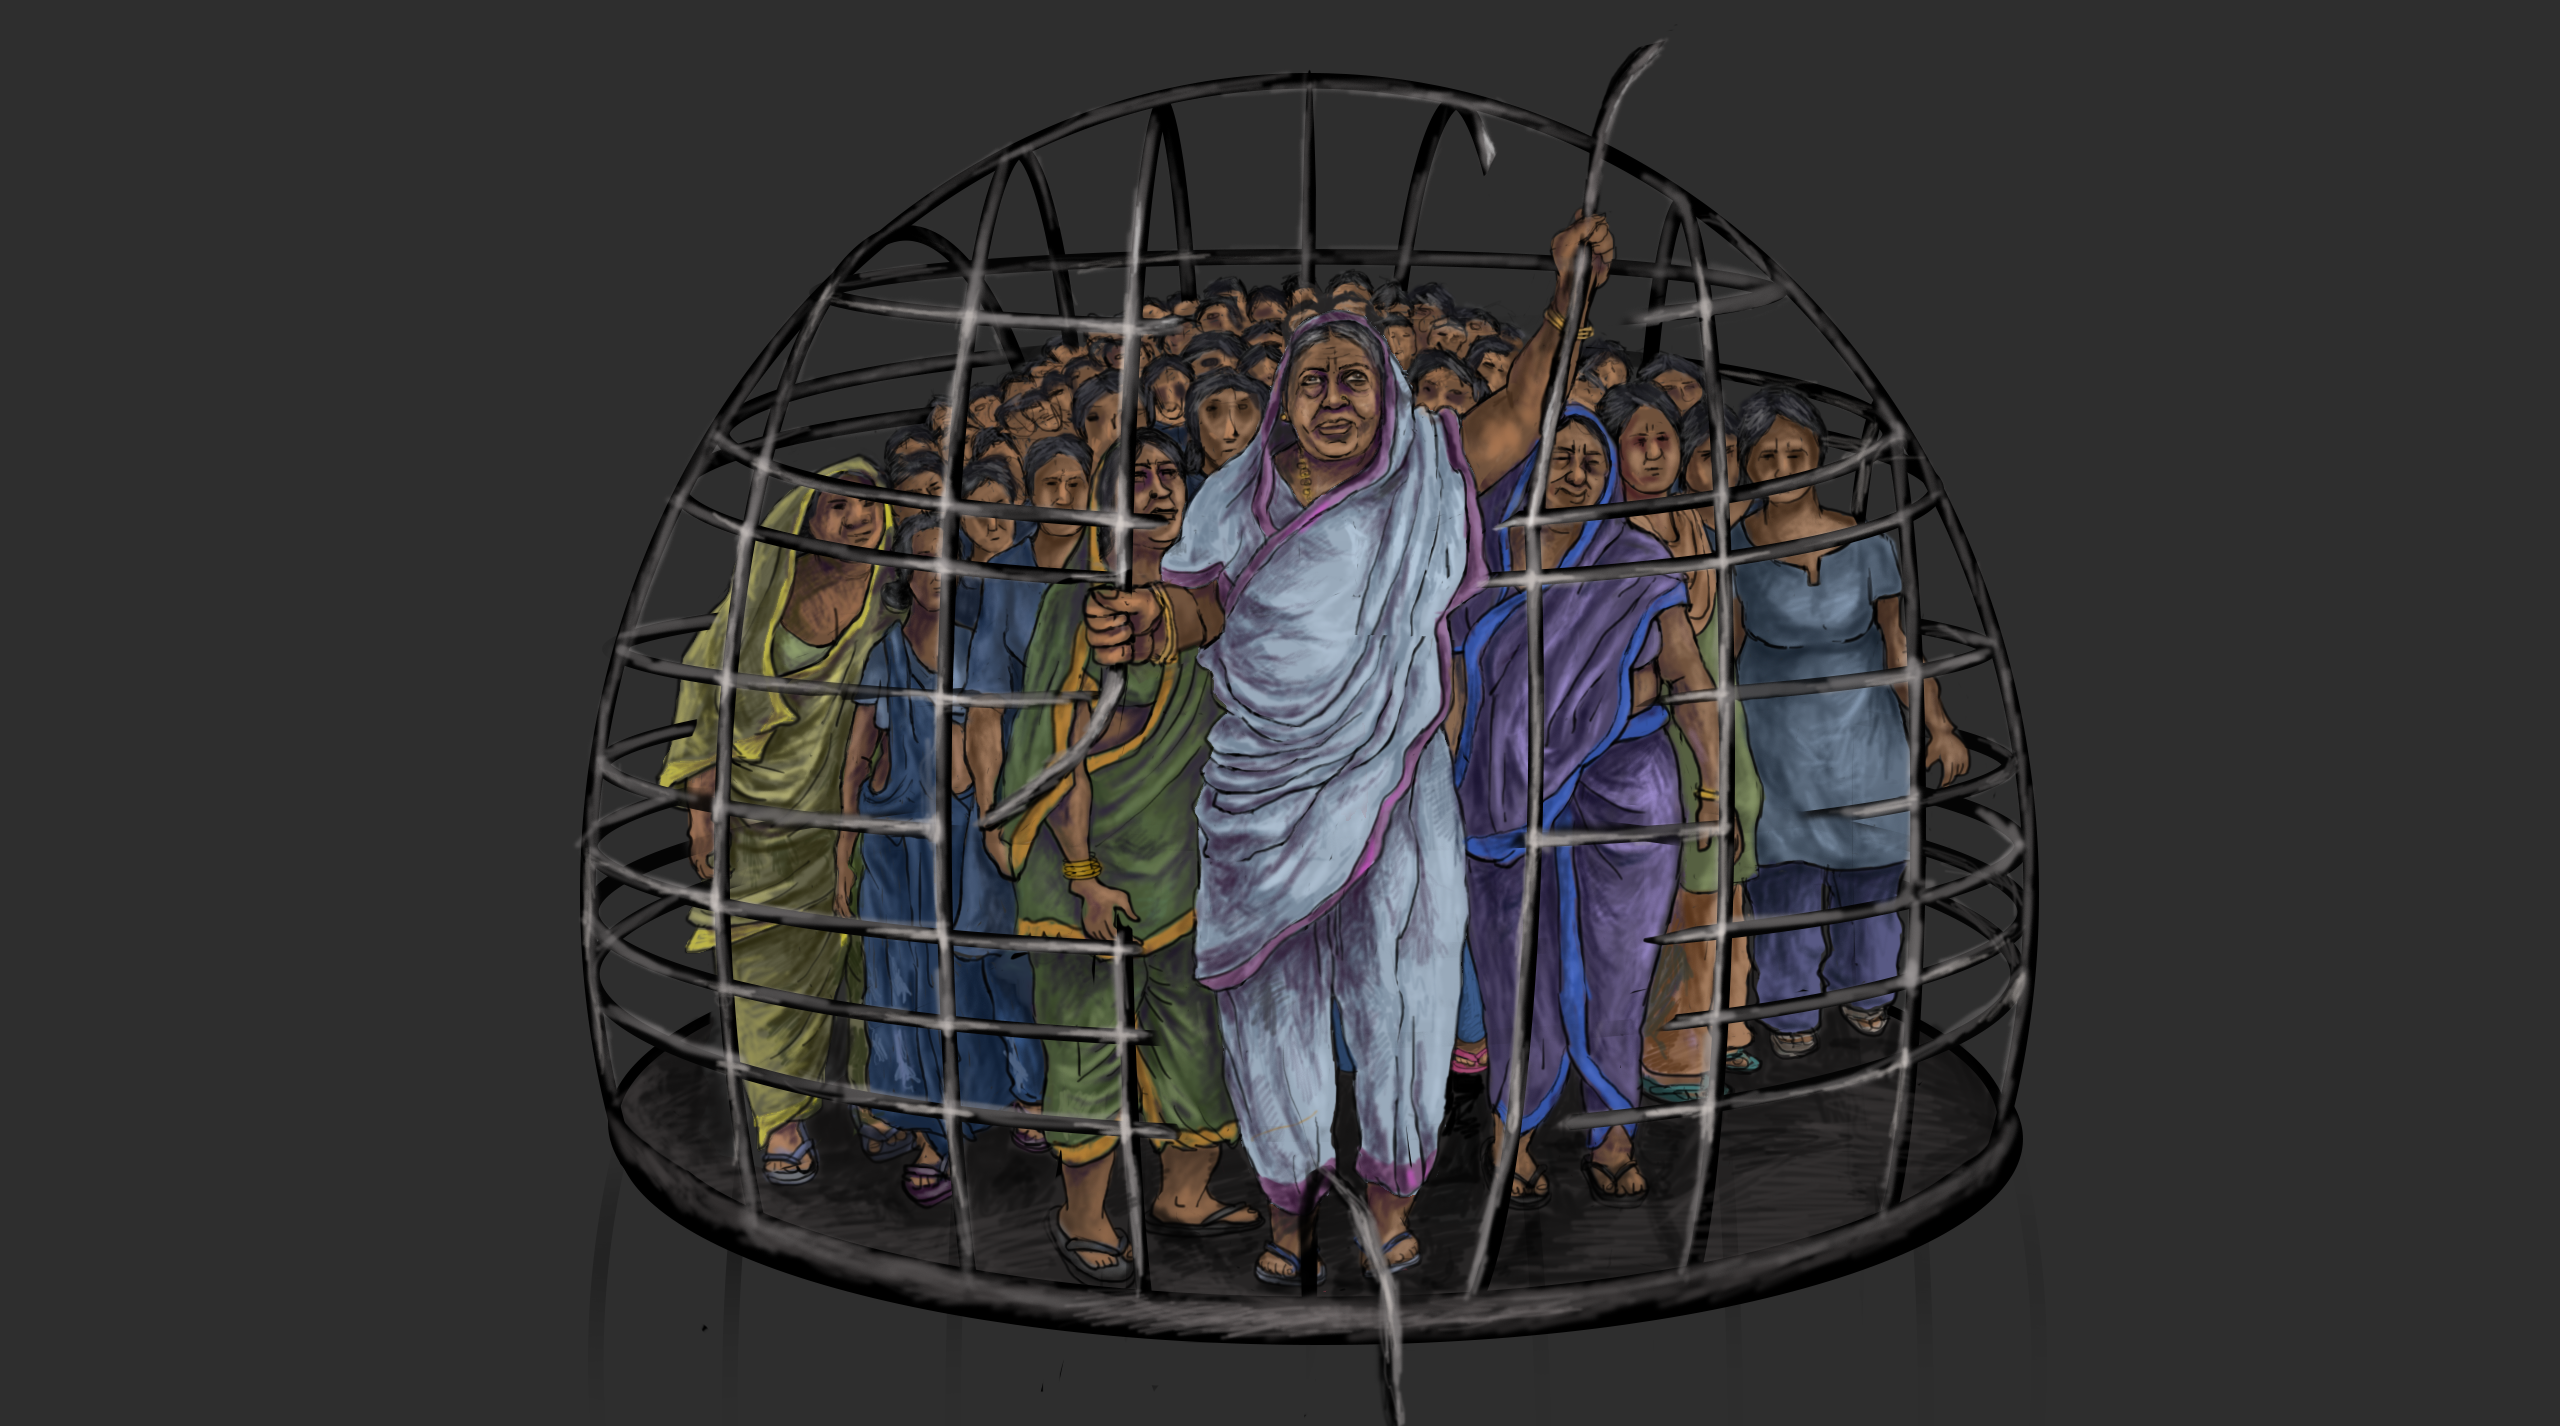 Illustration with an Indian woman who symbolically breaks open a cage that has emprisoned a group of women.